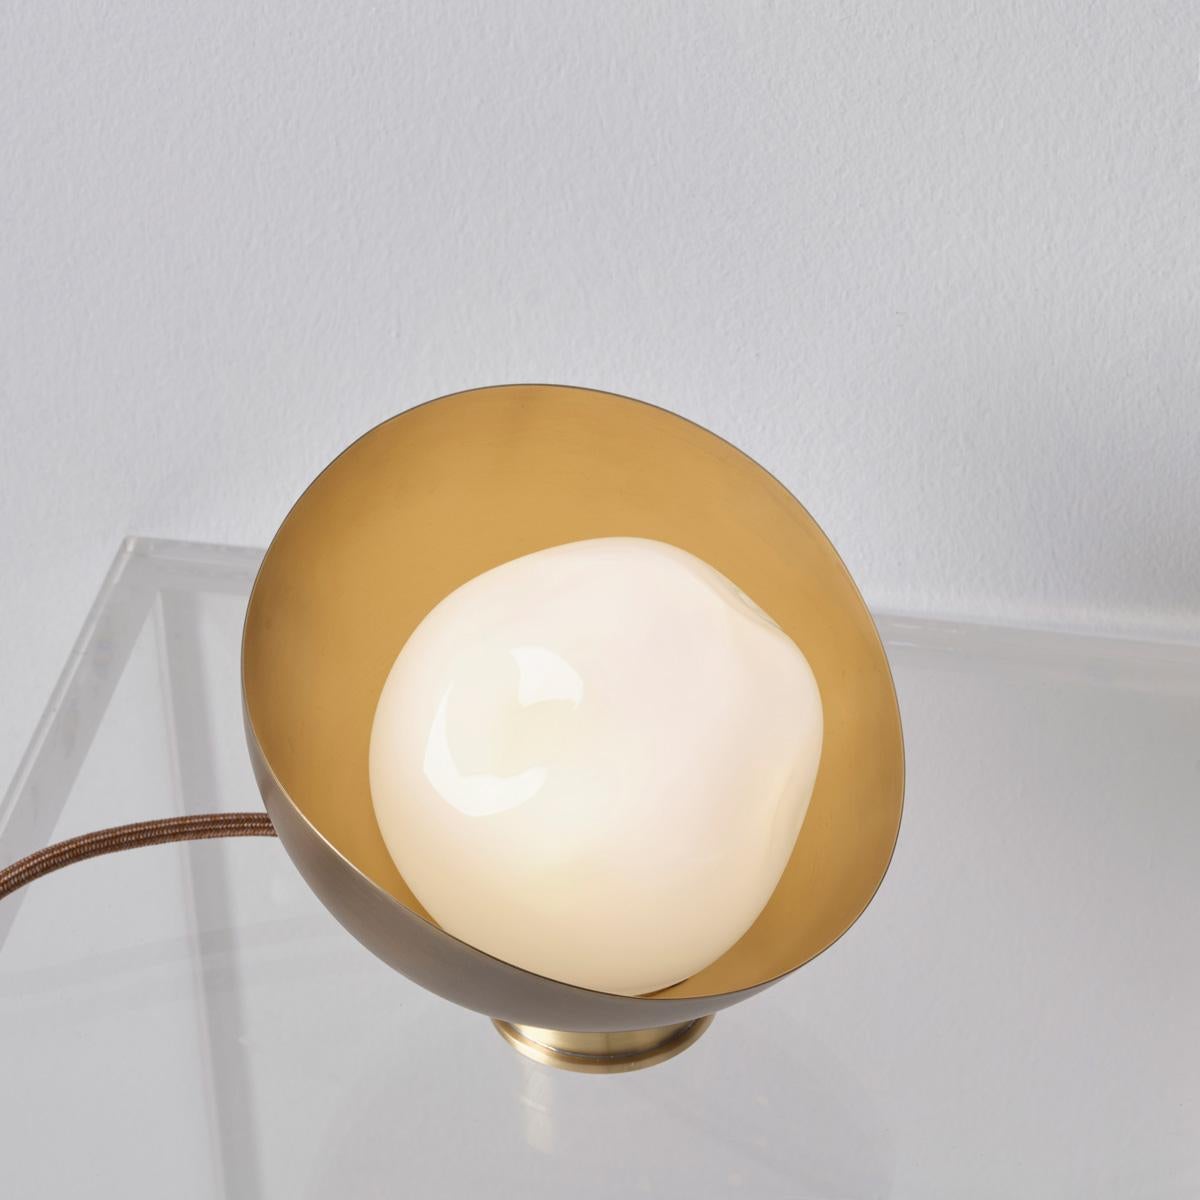 Perla Mini Table Lamp by Gaspare Asaro. Sand White and Satin Brass Finish In New Condition For Sale In New York, NY